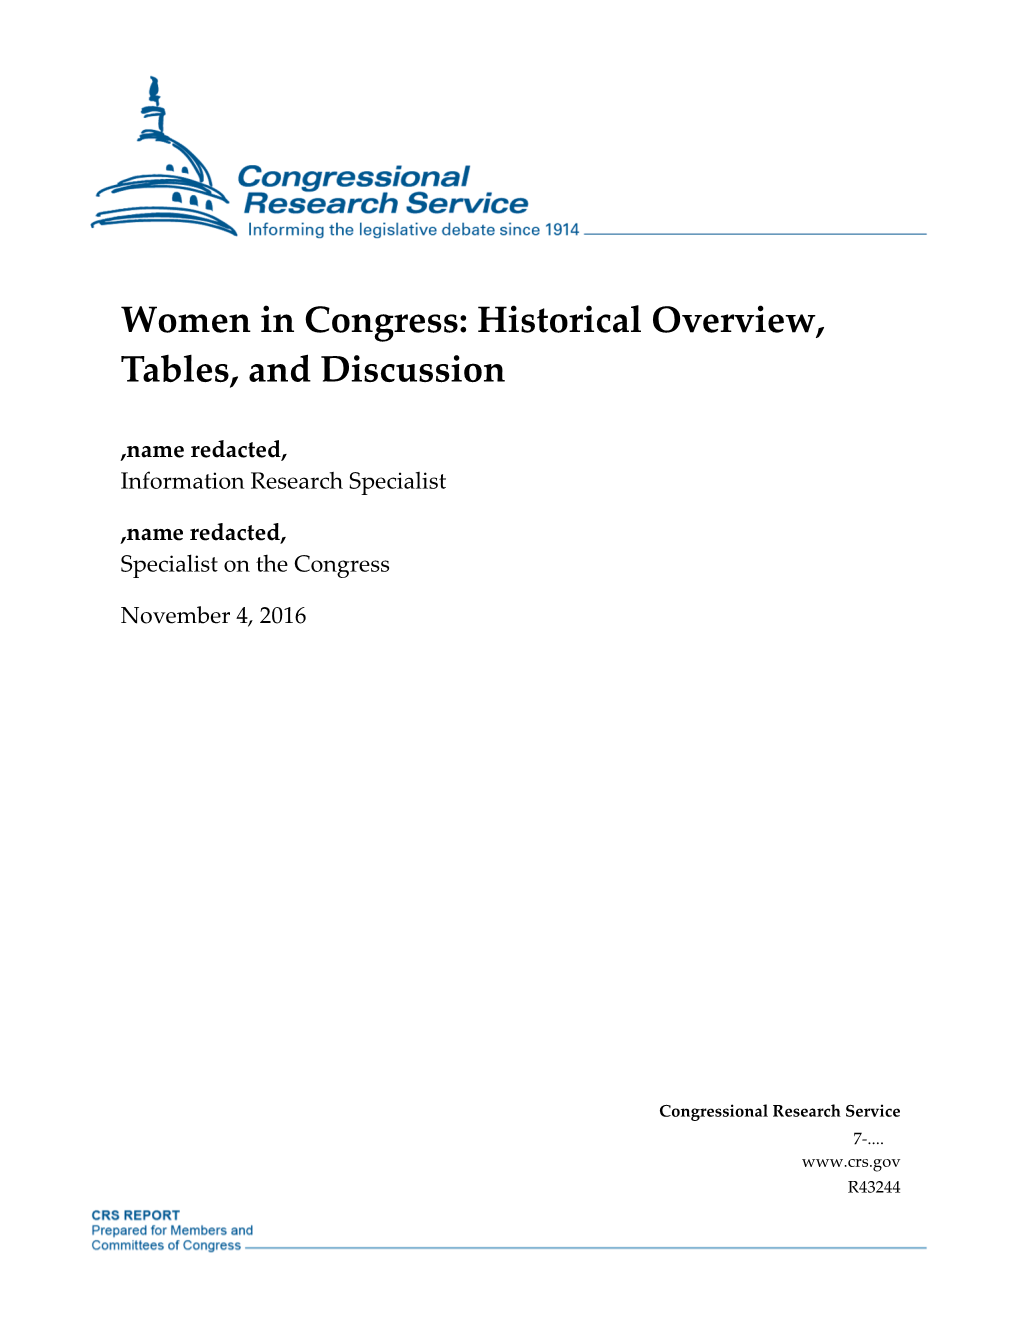 Women in Congress: Historical Overview, Tables, and Discussion